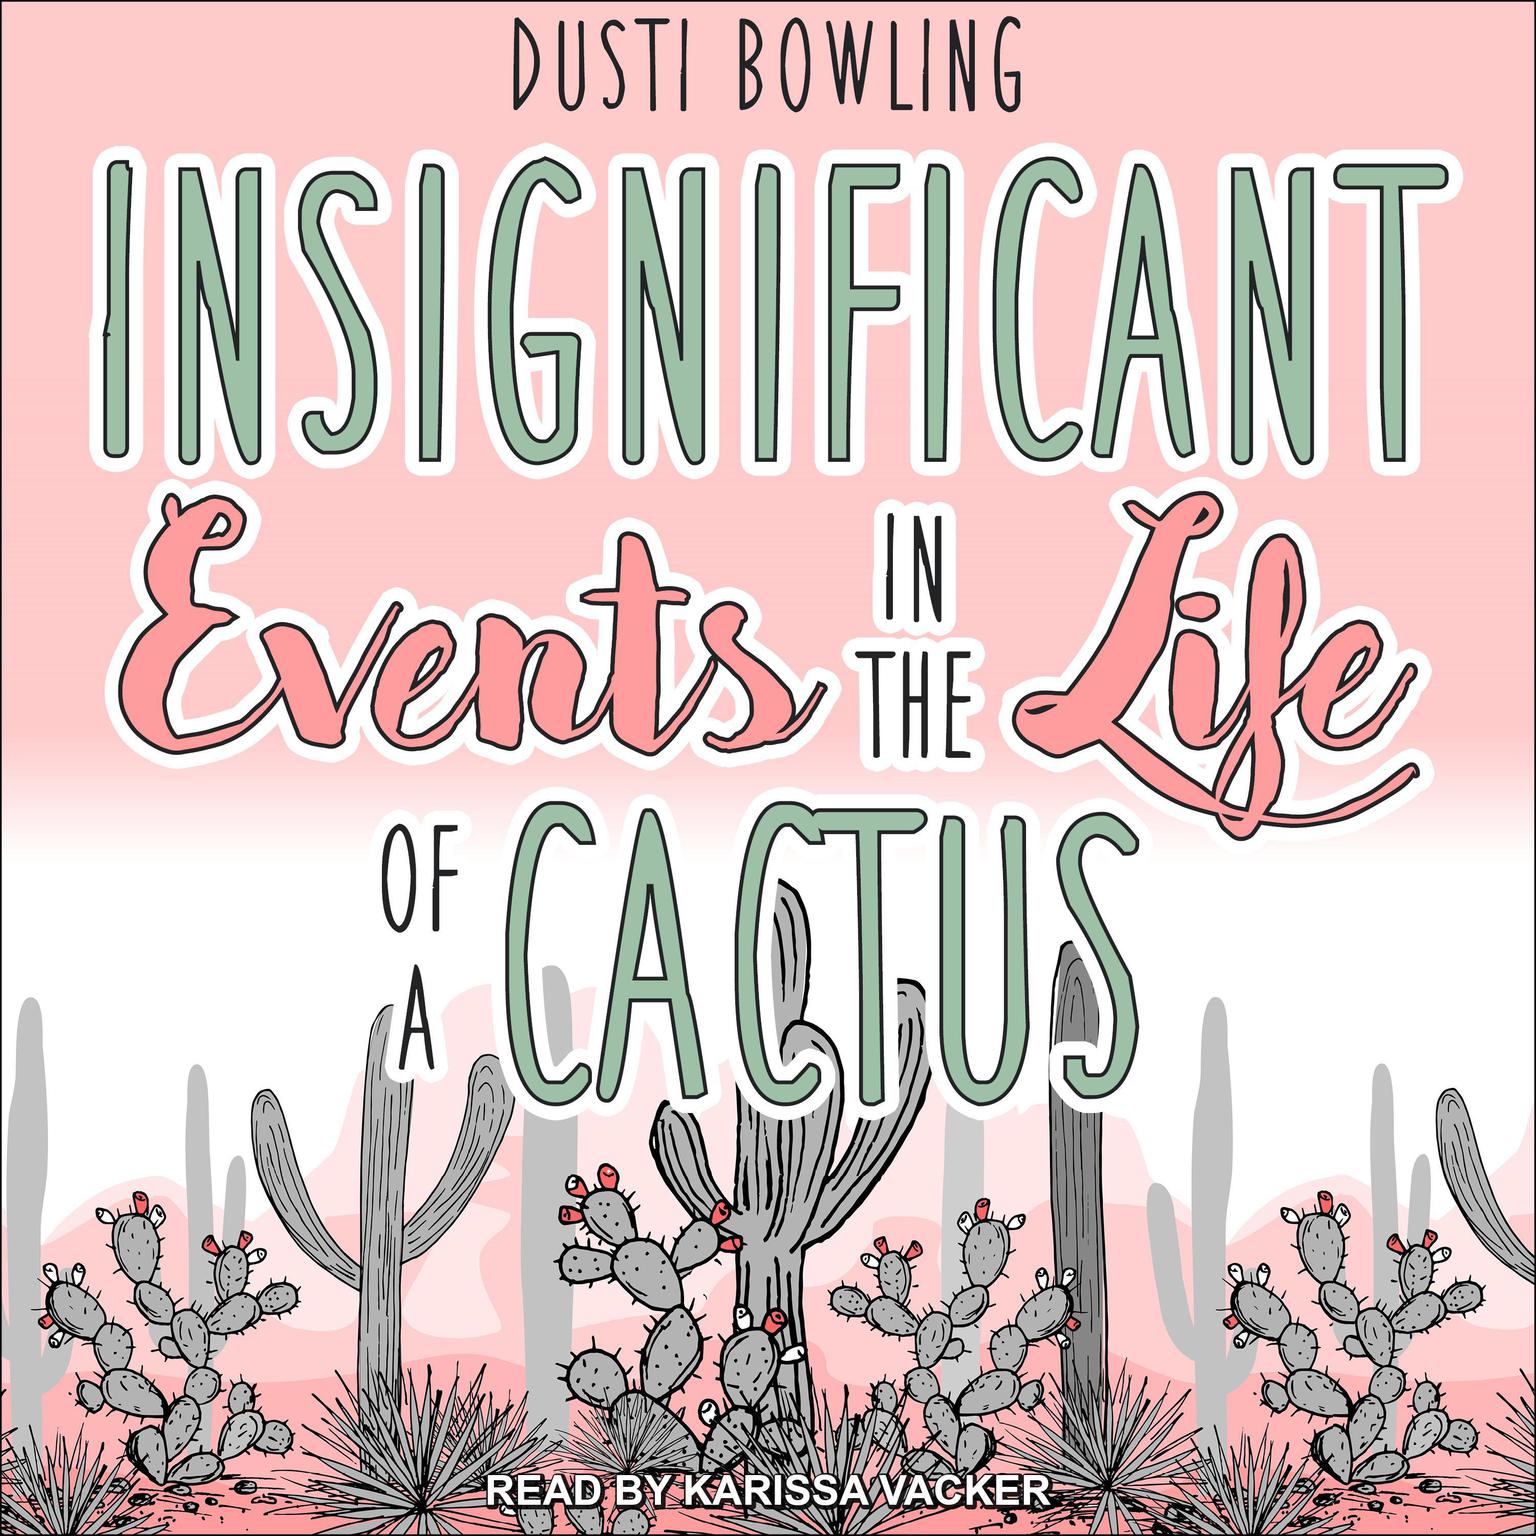 Insignificant Events in the Life of a Cactus Audiobook, by Dusti Bowling